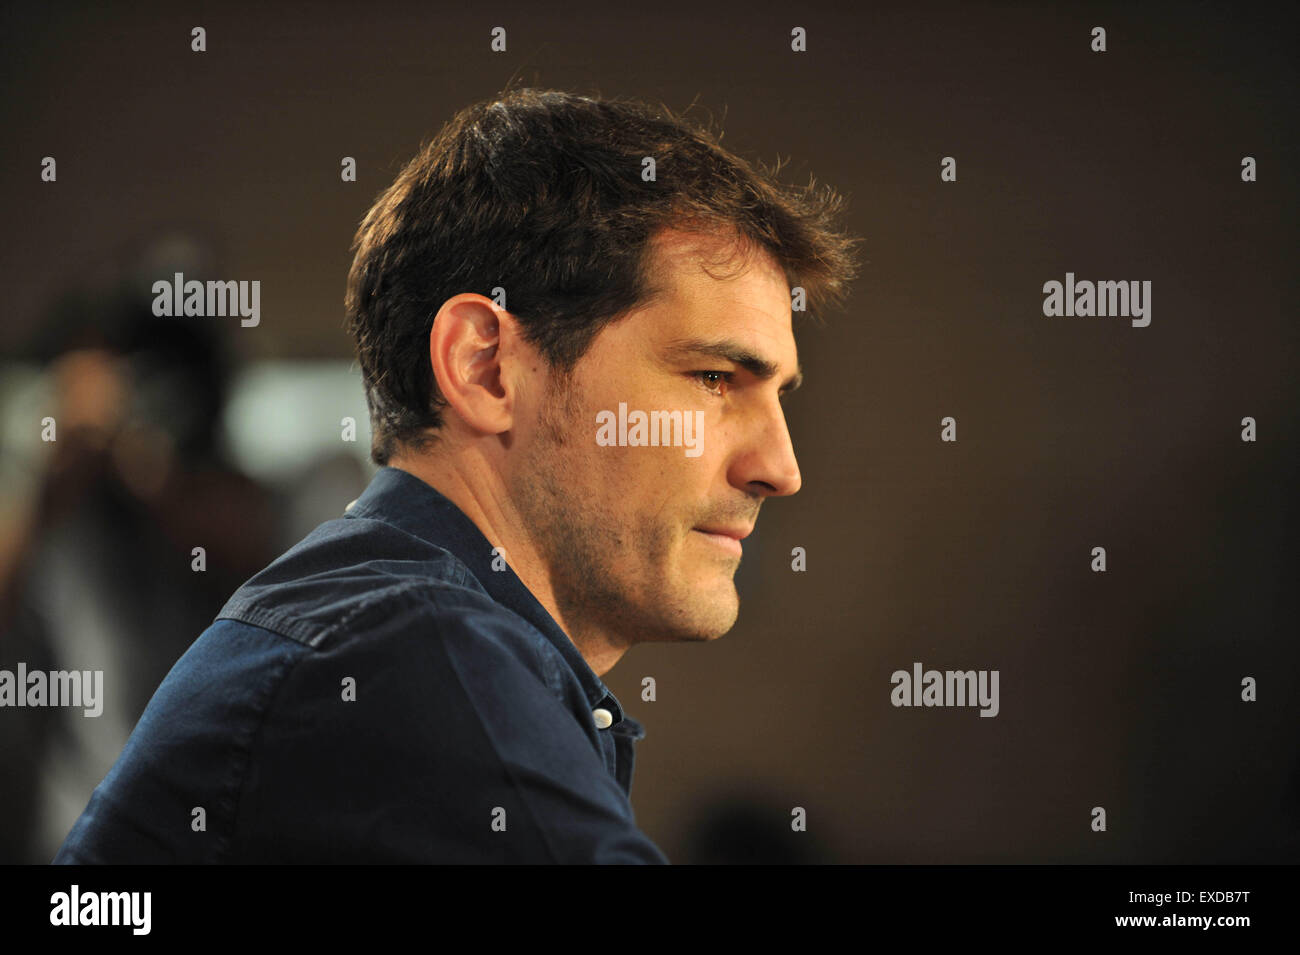 Madrid, Spain. 12th July, 2015. Real Madrid's goalkeeper Iker Casillas attends the press conference at the Santiago Bernabeu stadium in Madrid, Spain, July 12, 2015. The 34-year-old Iker Casillas will leave the Spanish La Liga top club for FC Porto after 25 years. Credit:  Xie Haining/Xinhua/Alamy Live News Stock Photo